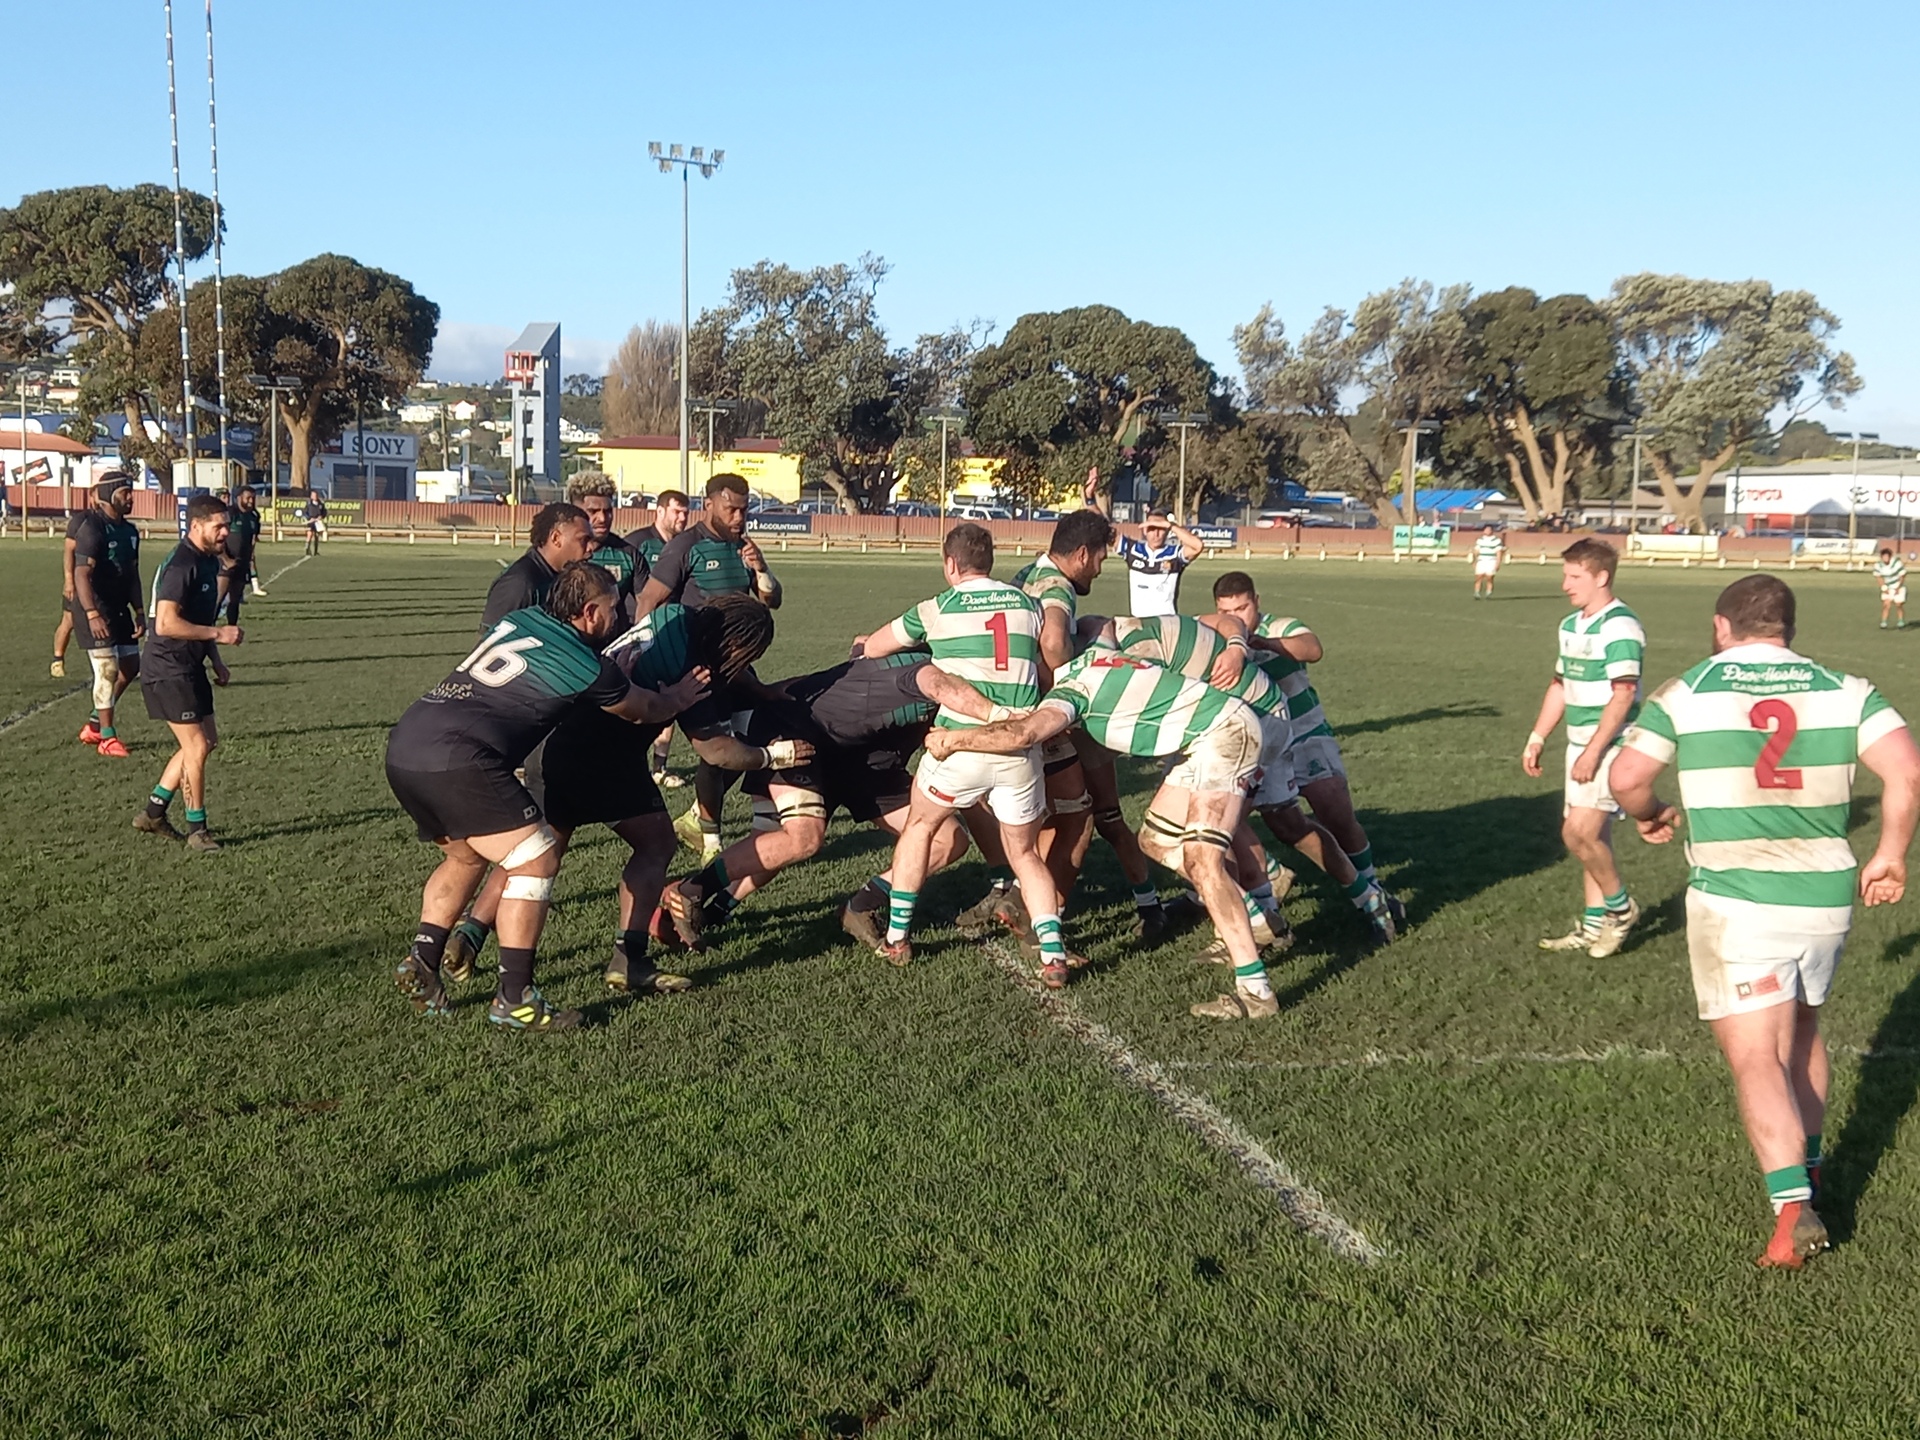 Whanganui club rugby Marists win over Ngamatapouri not enough for Premier playoff berth